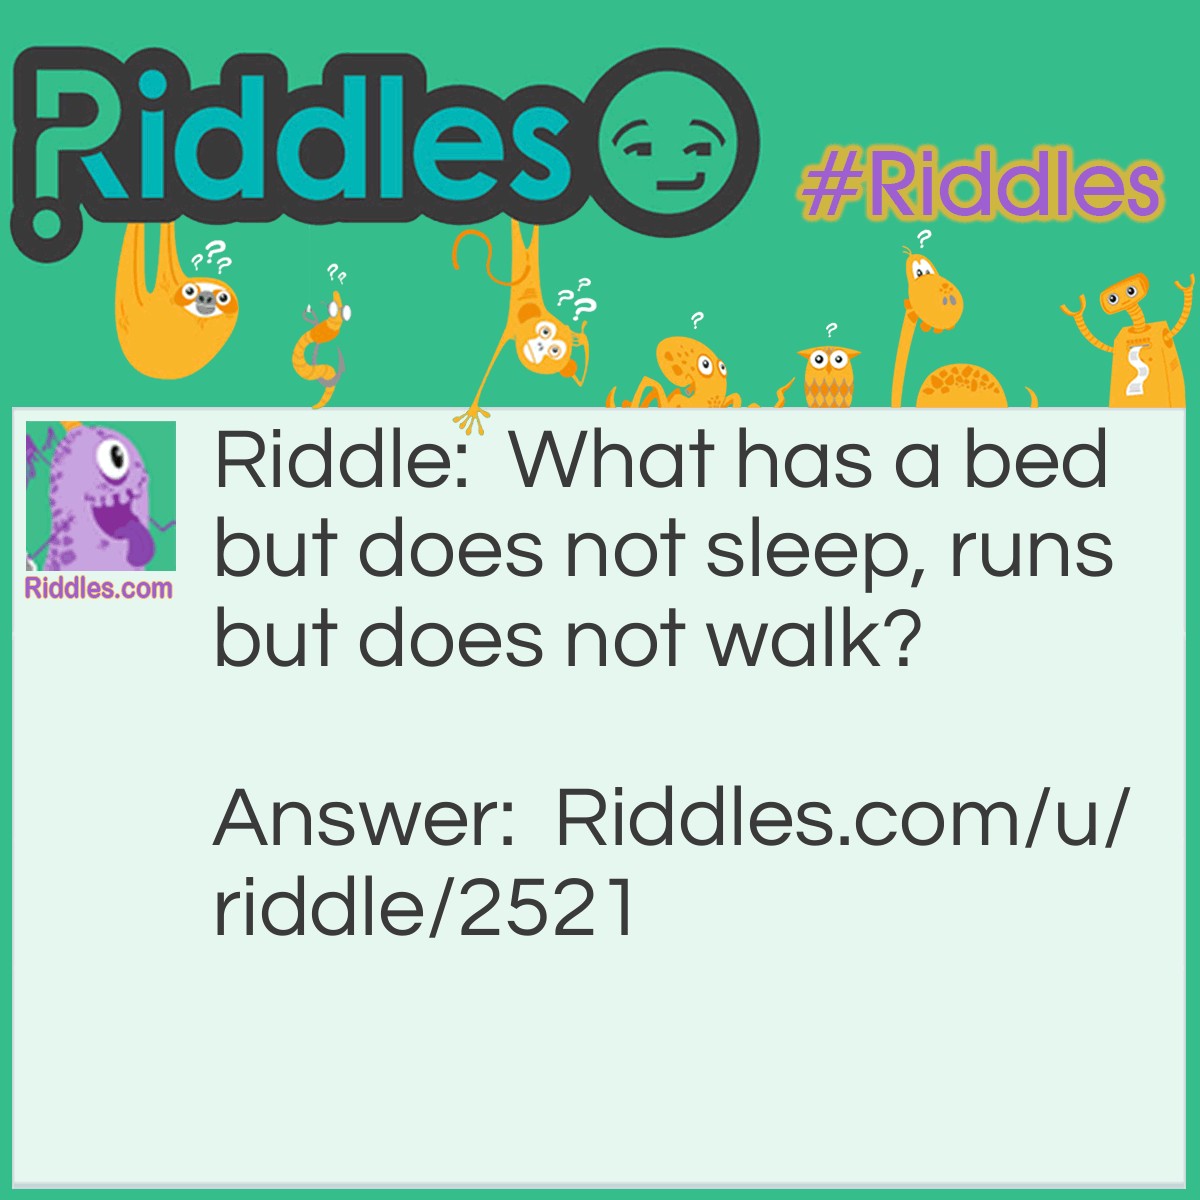 Riddle: What has a bed but does not sleep, runs but does not walk? Answer: A river